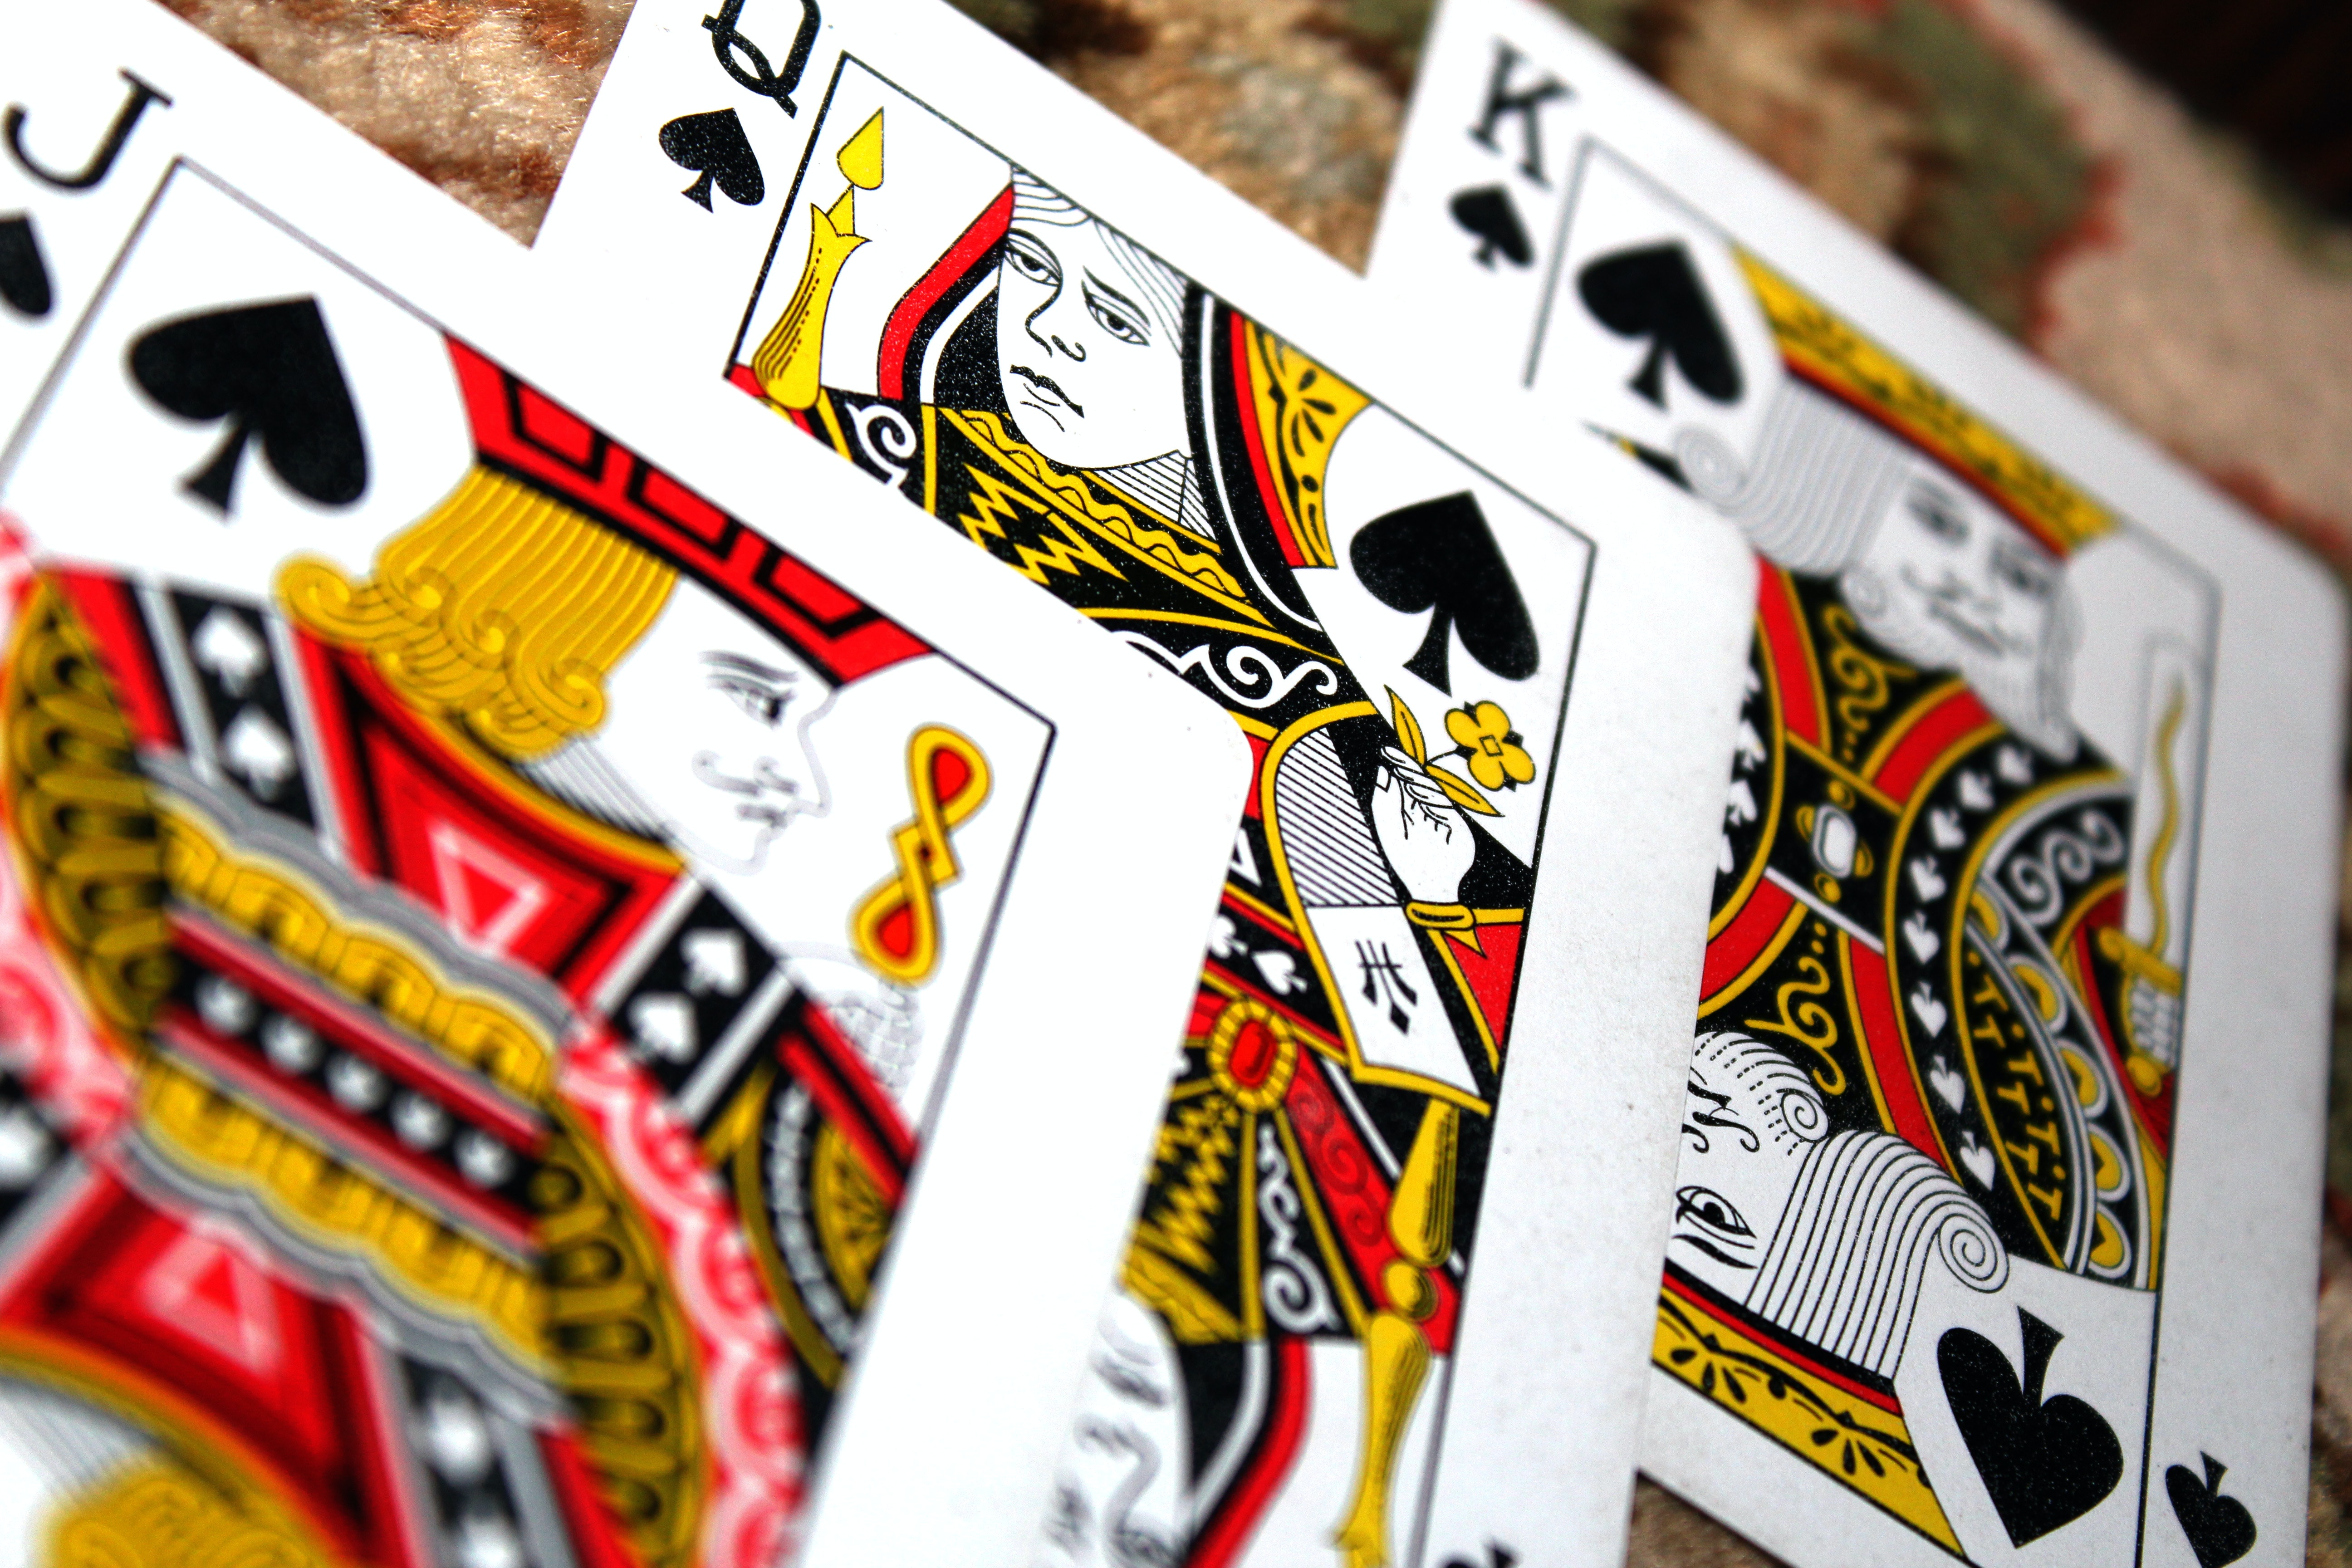 image of a deck of cards, jack of spades, queen of spades and king of spades